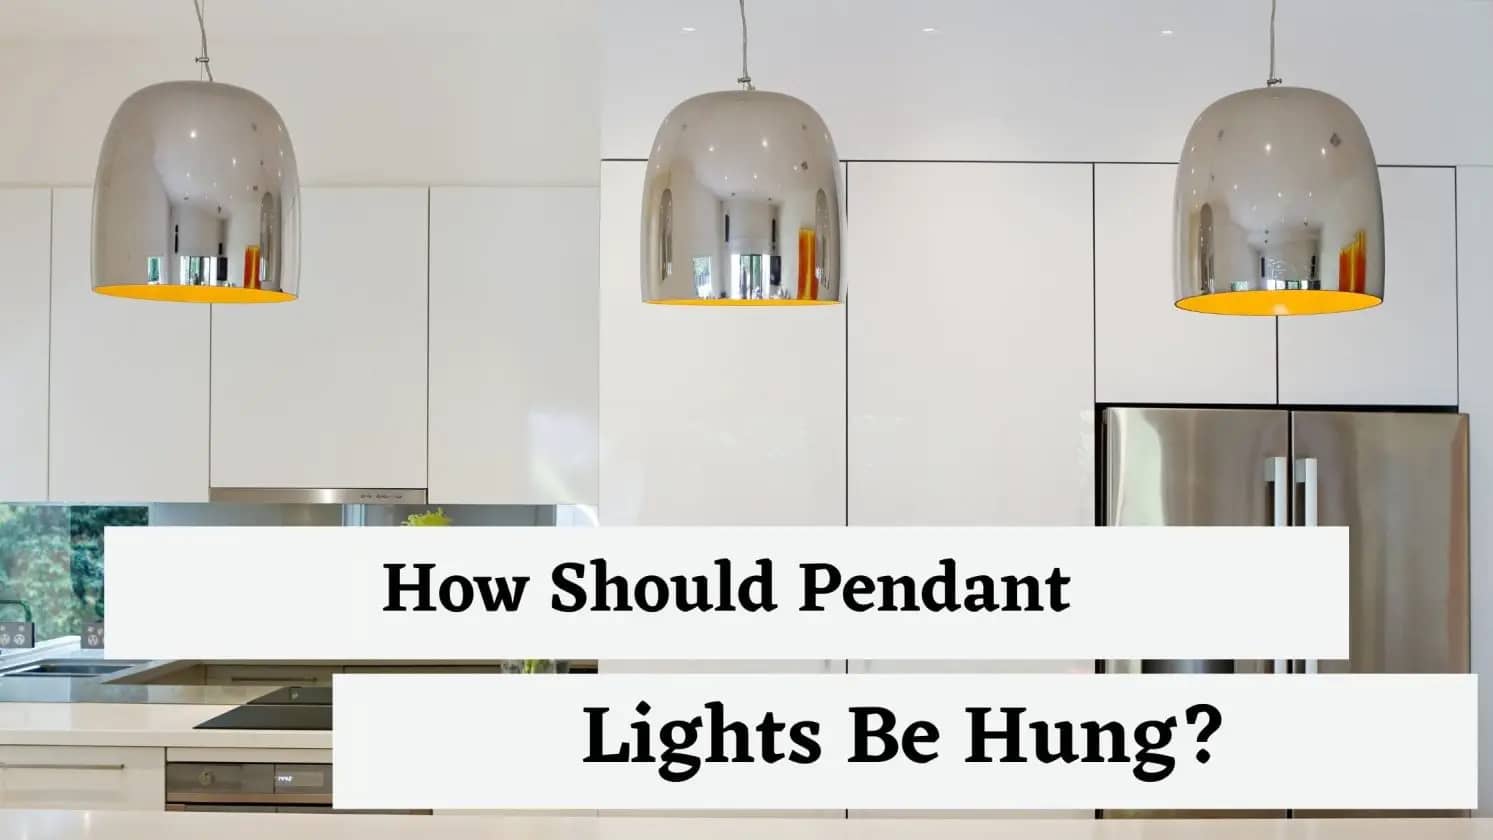 How Should Pendant Lights Be Hung?